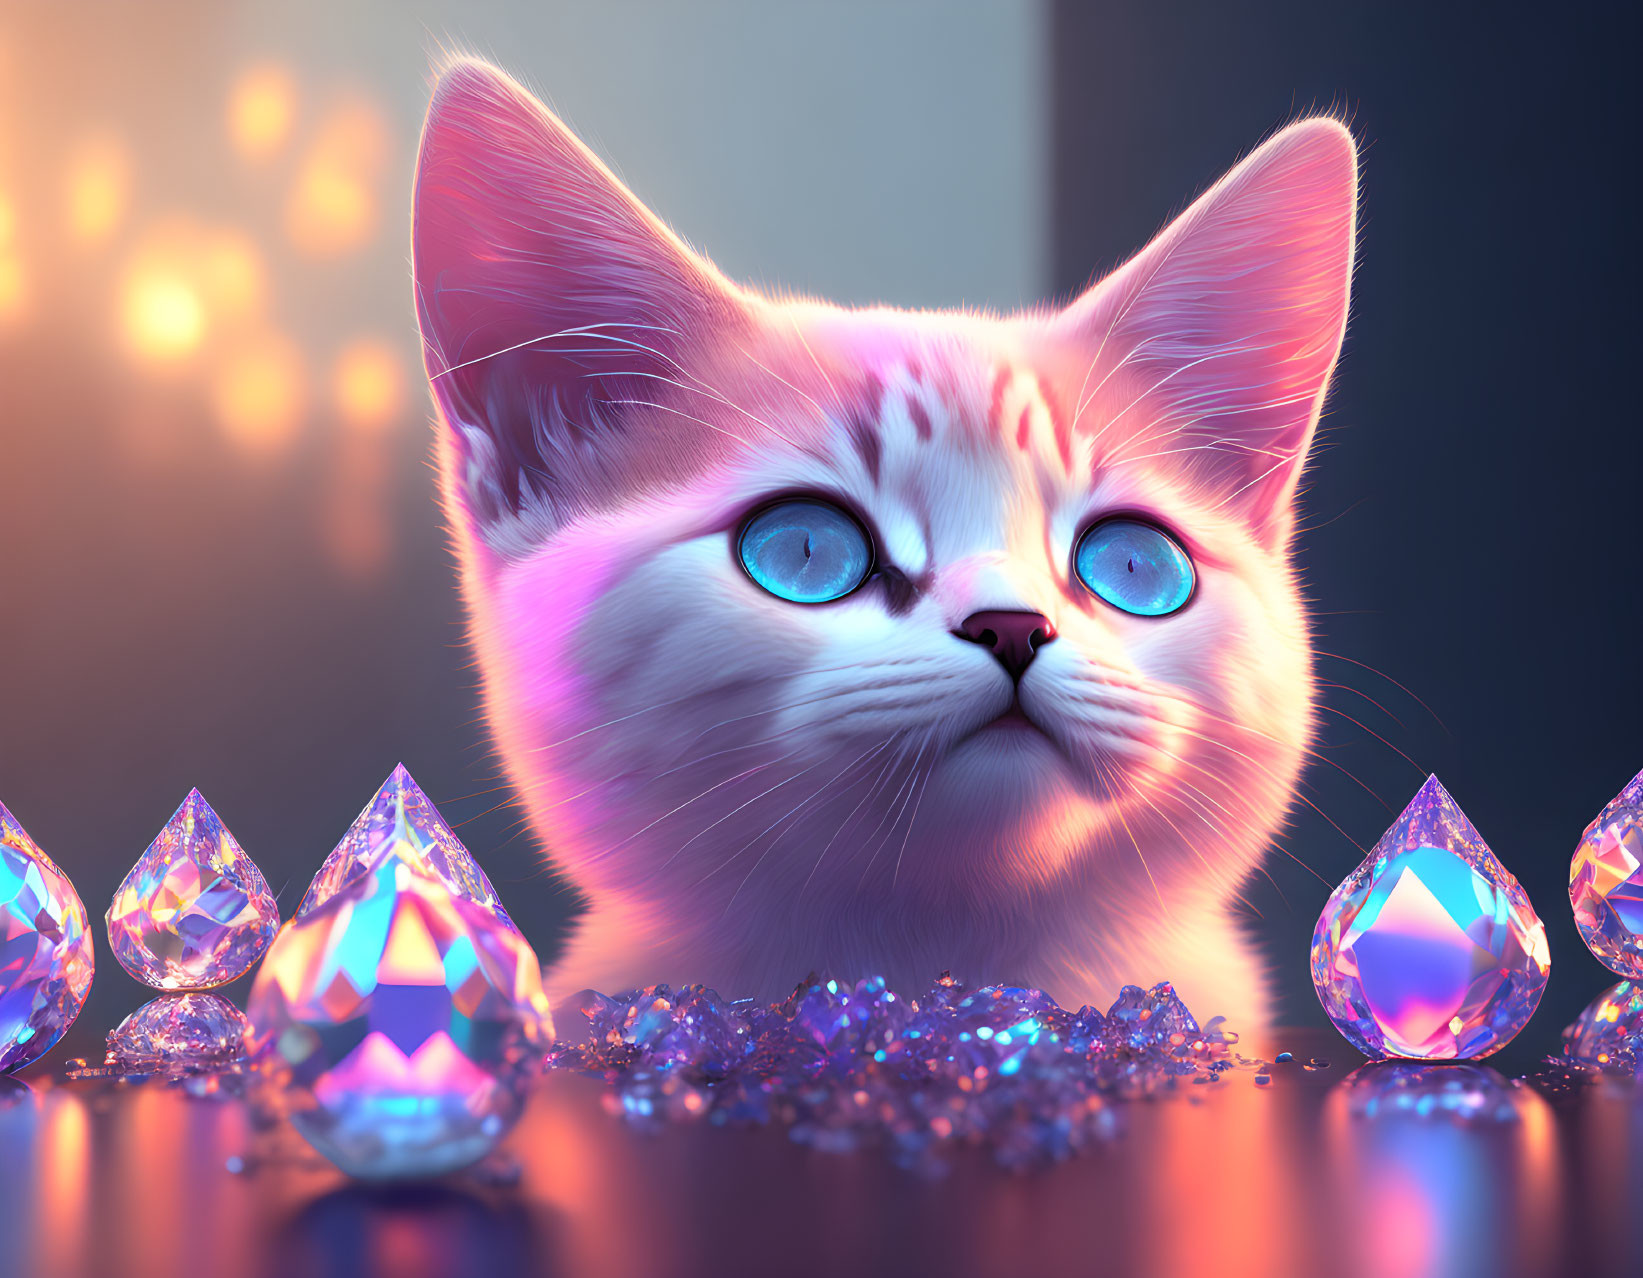 Surreal wide-eyed kitten with blue eyes amid sparkling gems